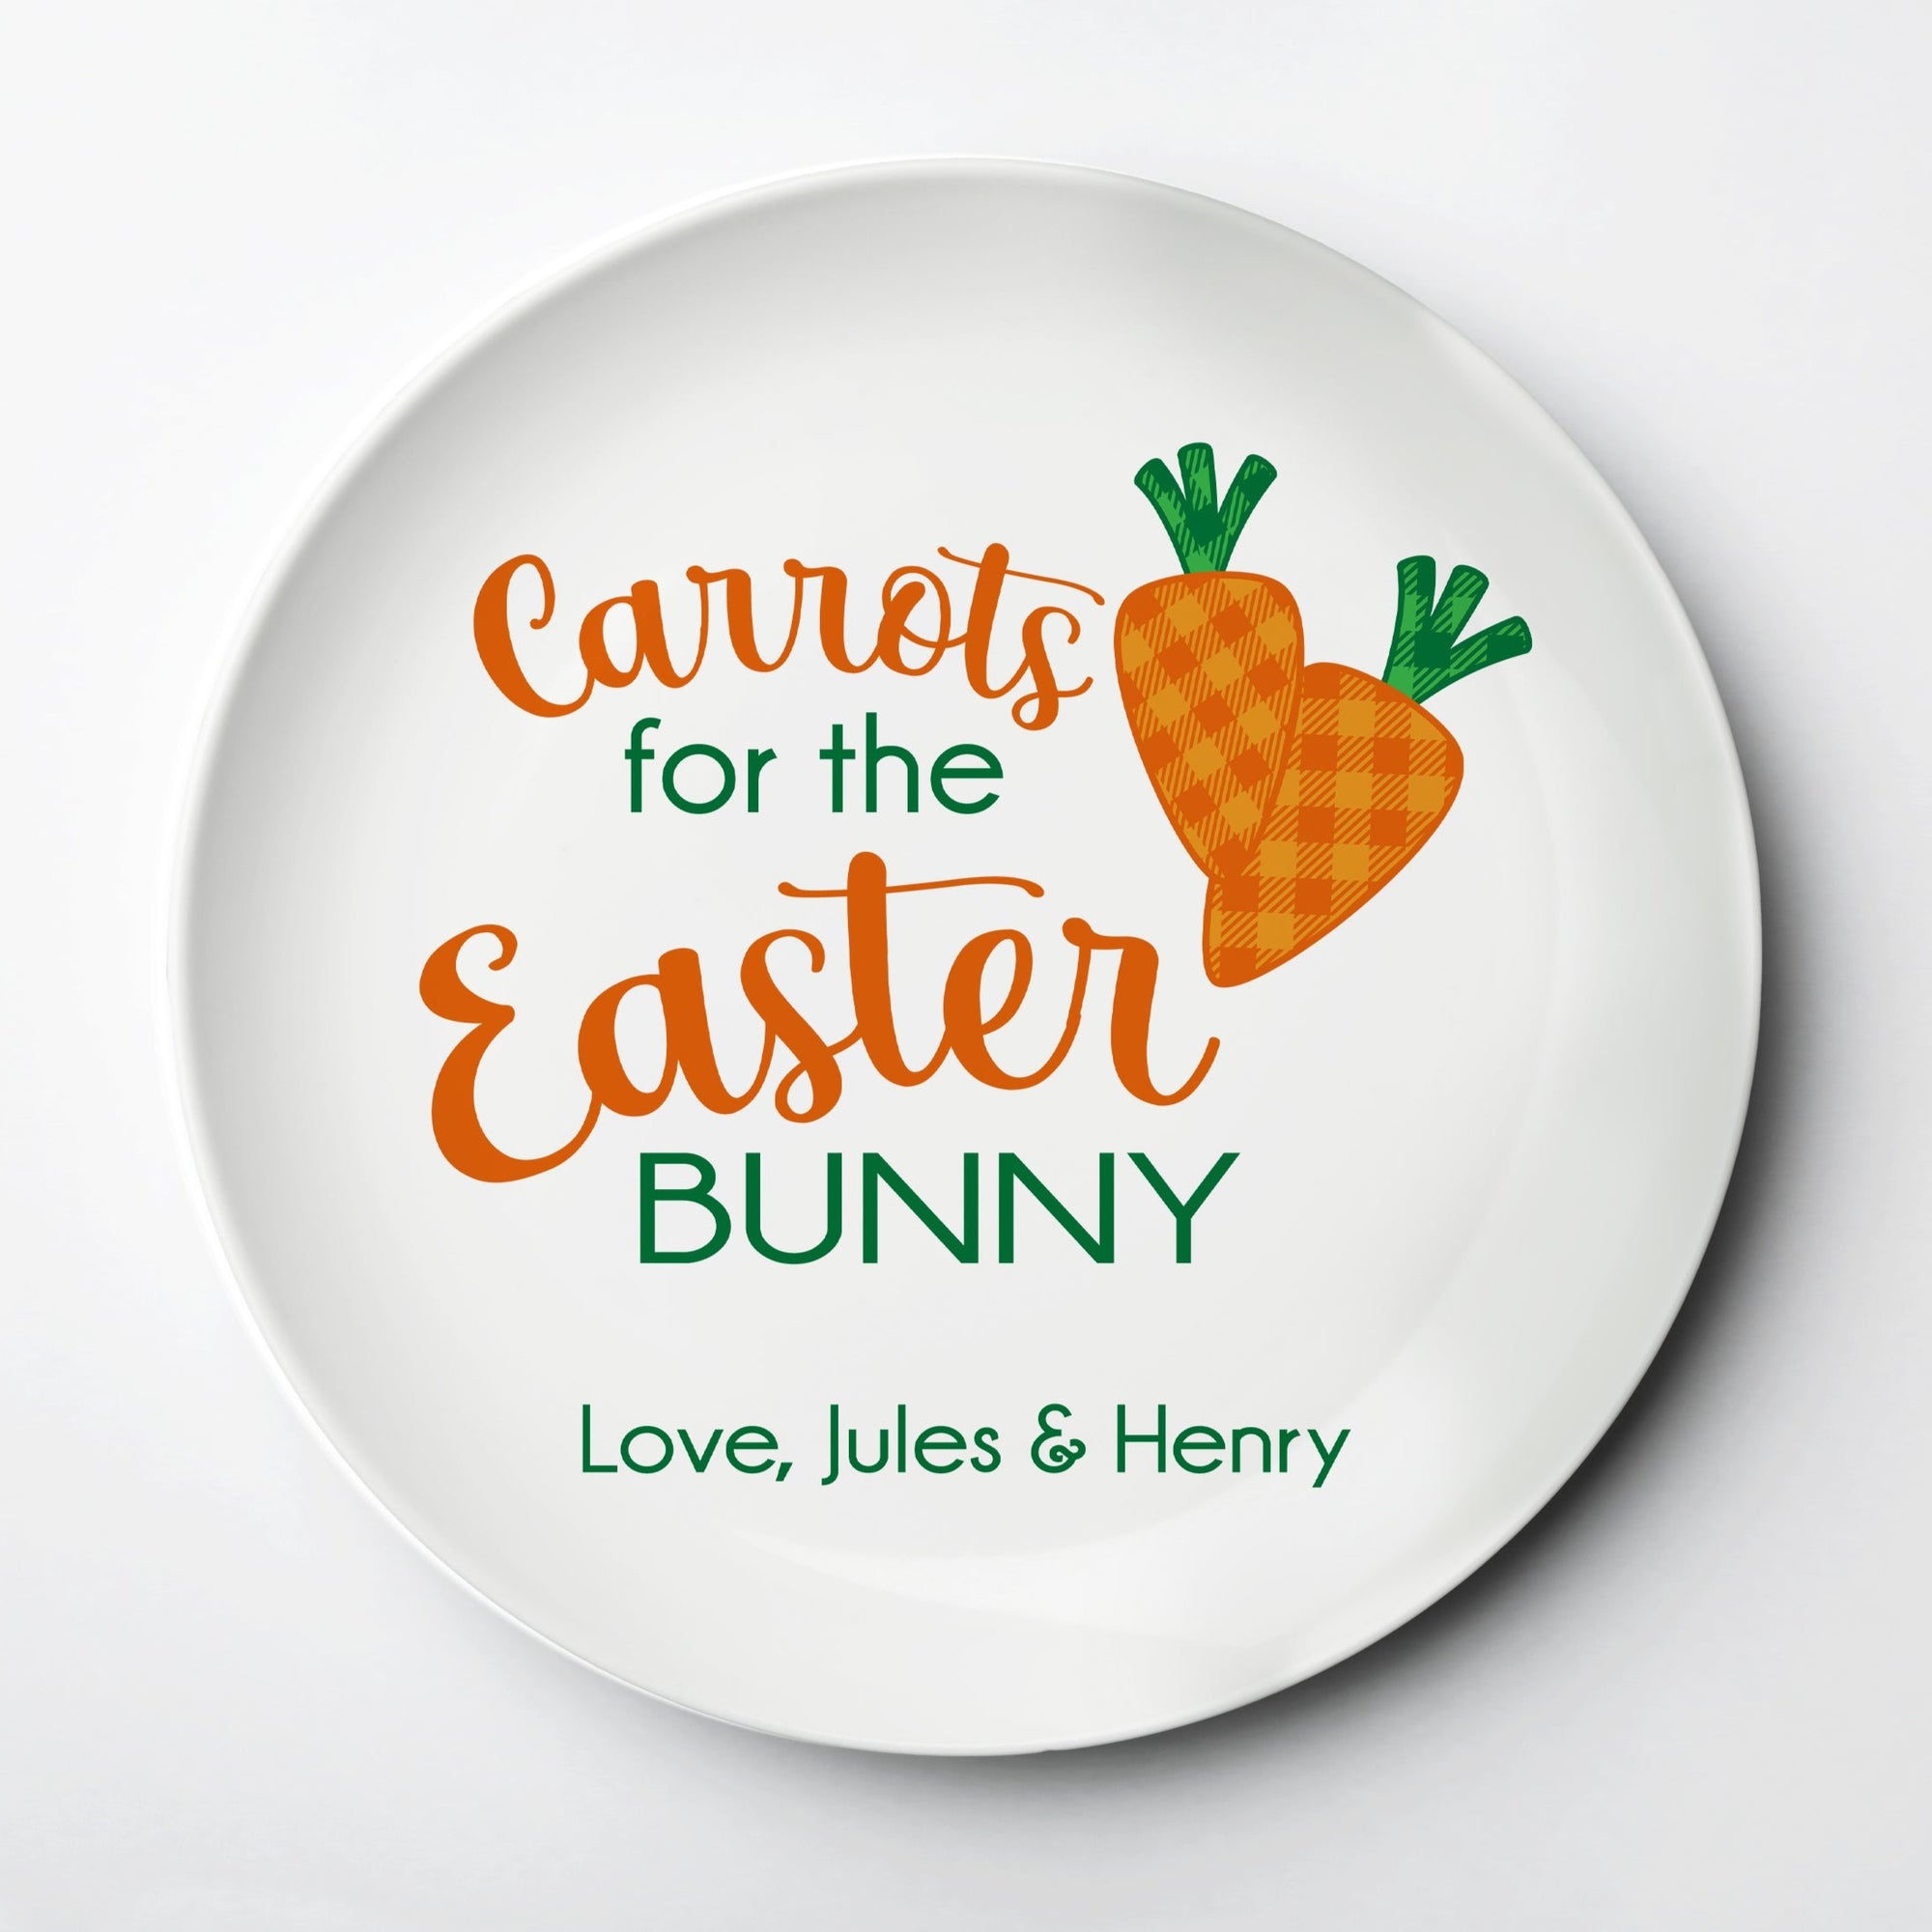 Easter, Carrots for the Easter bunny, personalized ThermoSāf® kids reusable plate, microwave, dishwasher and oven safe.  Made in the USA, Pipsy.com